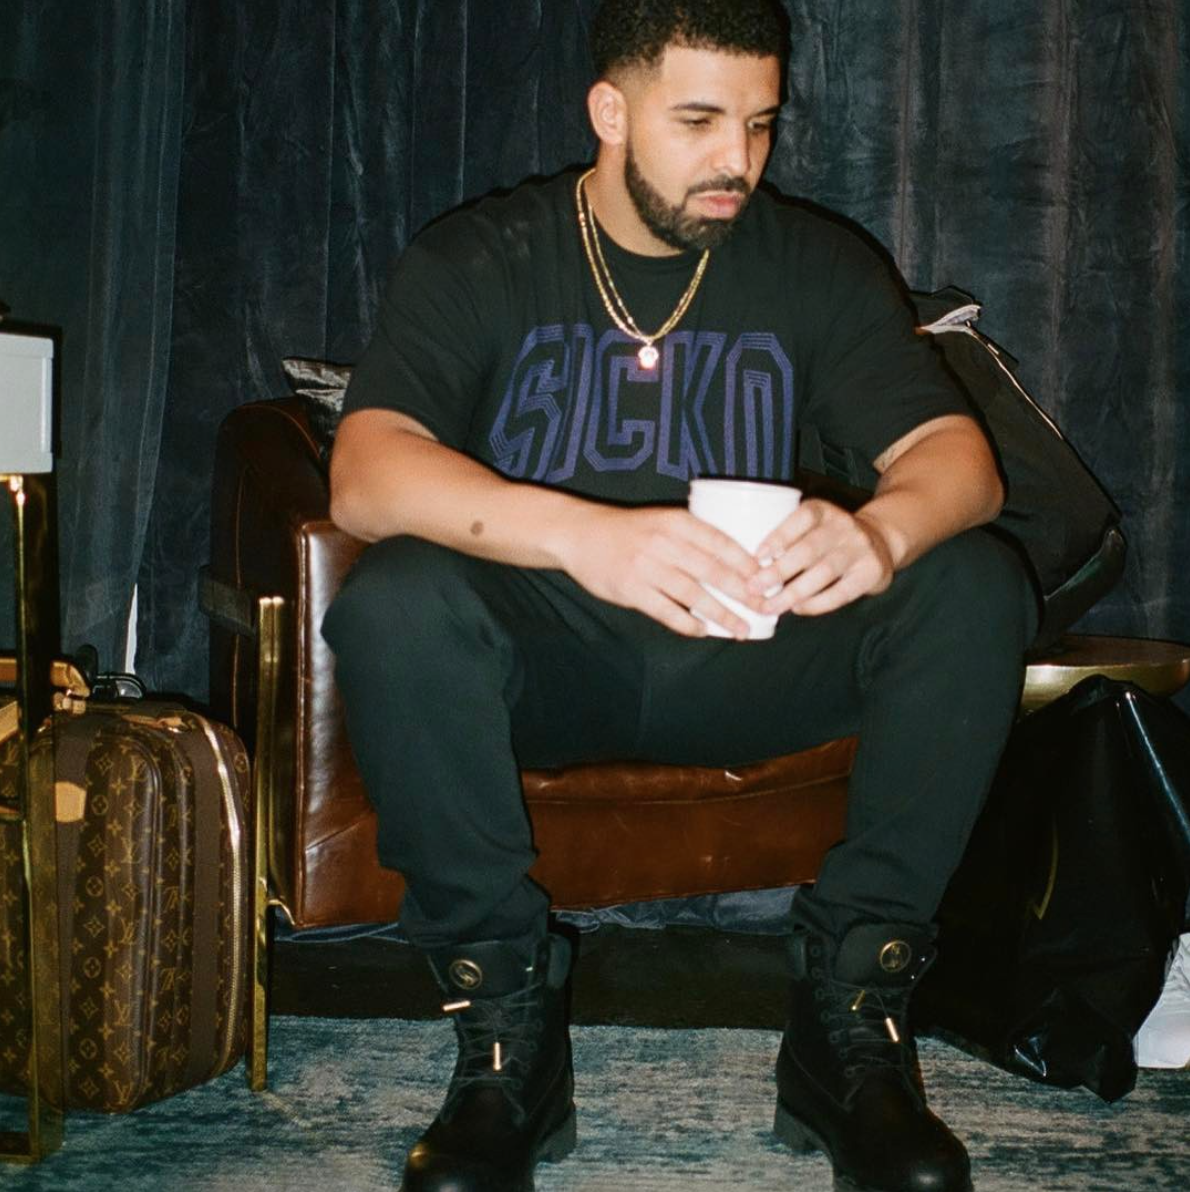 SPOTTED: Drake in Full Louis Vuitton During the Filming of SICKO